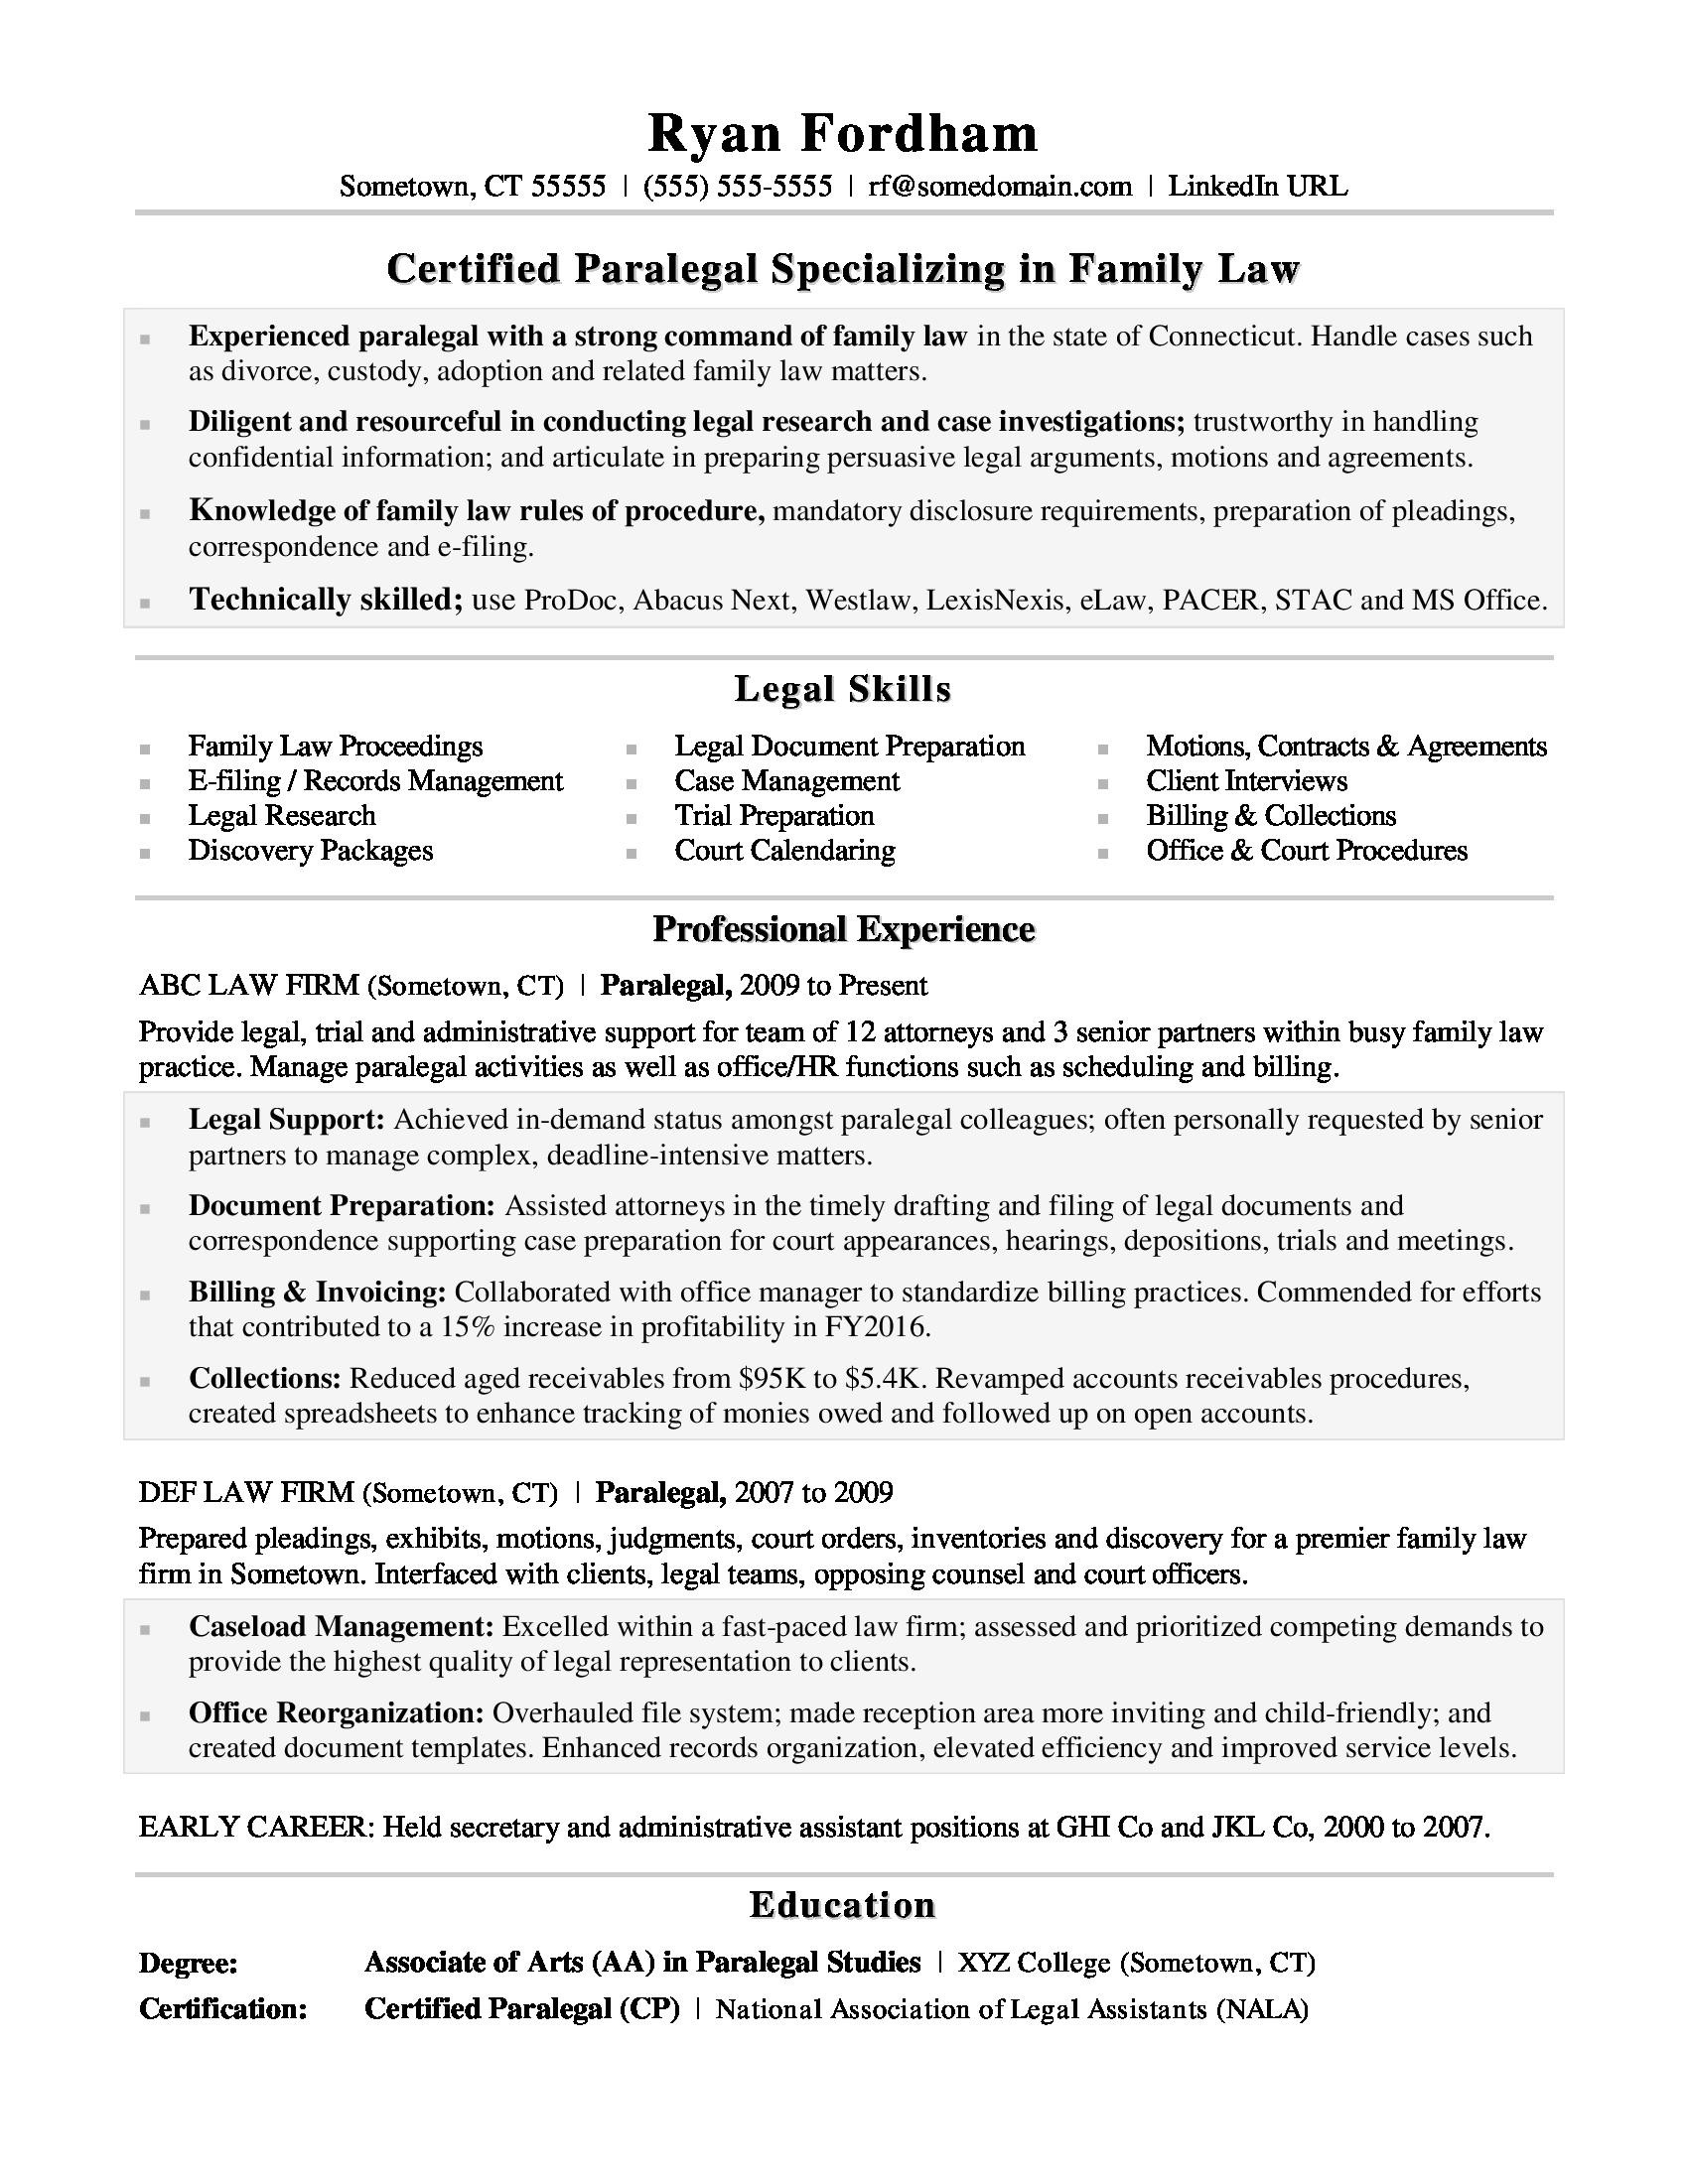 Sample Resumes for Paralegal with No Experience Paralegal Resume Sample Monster.com